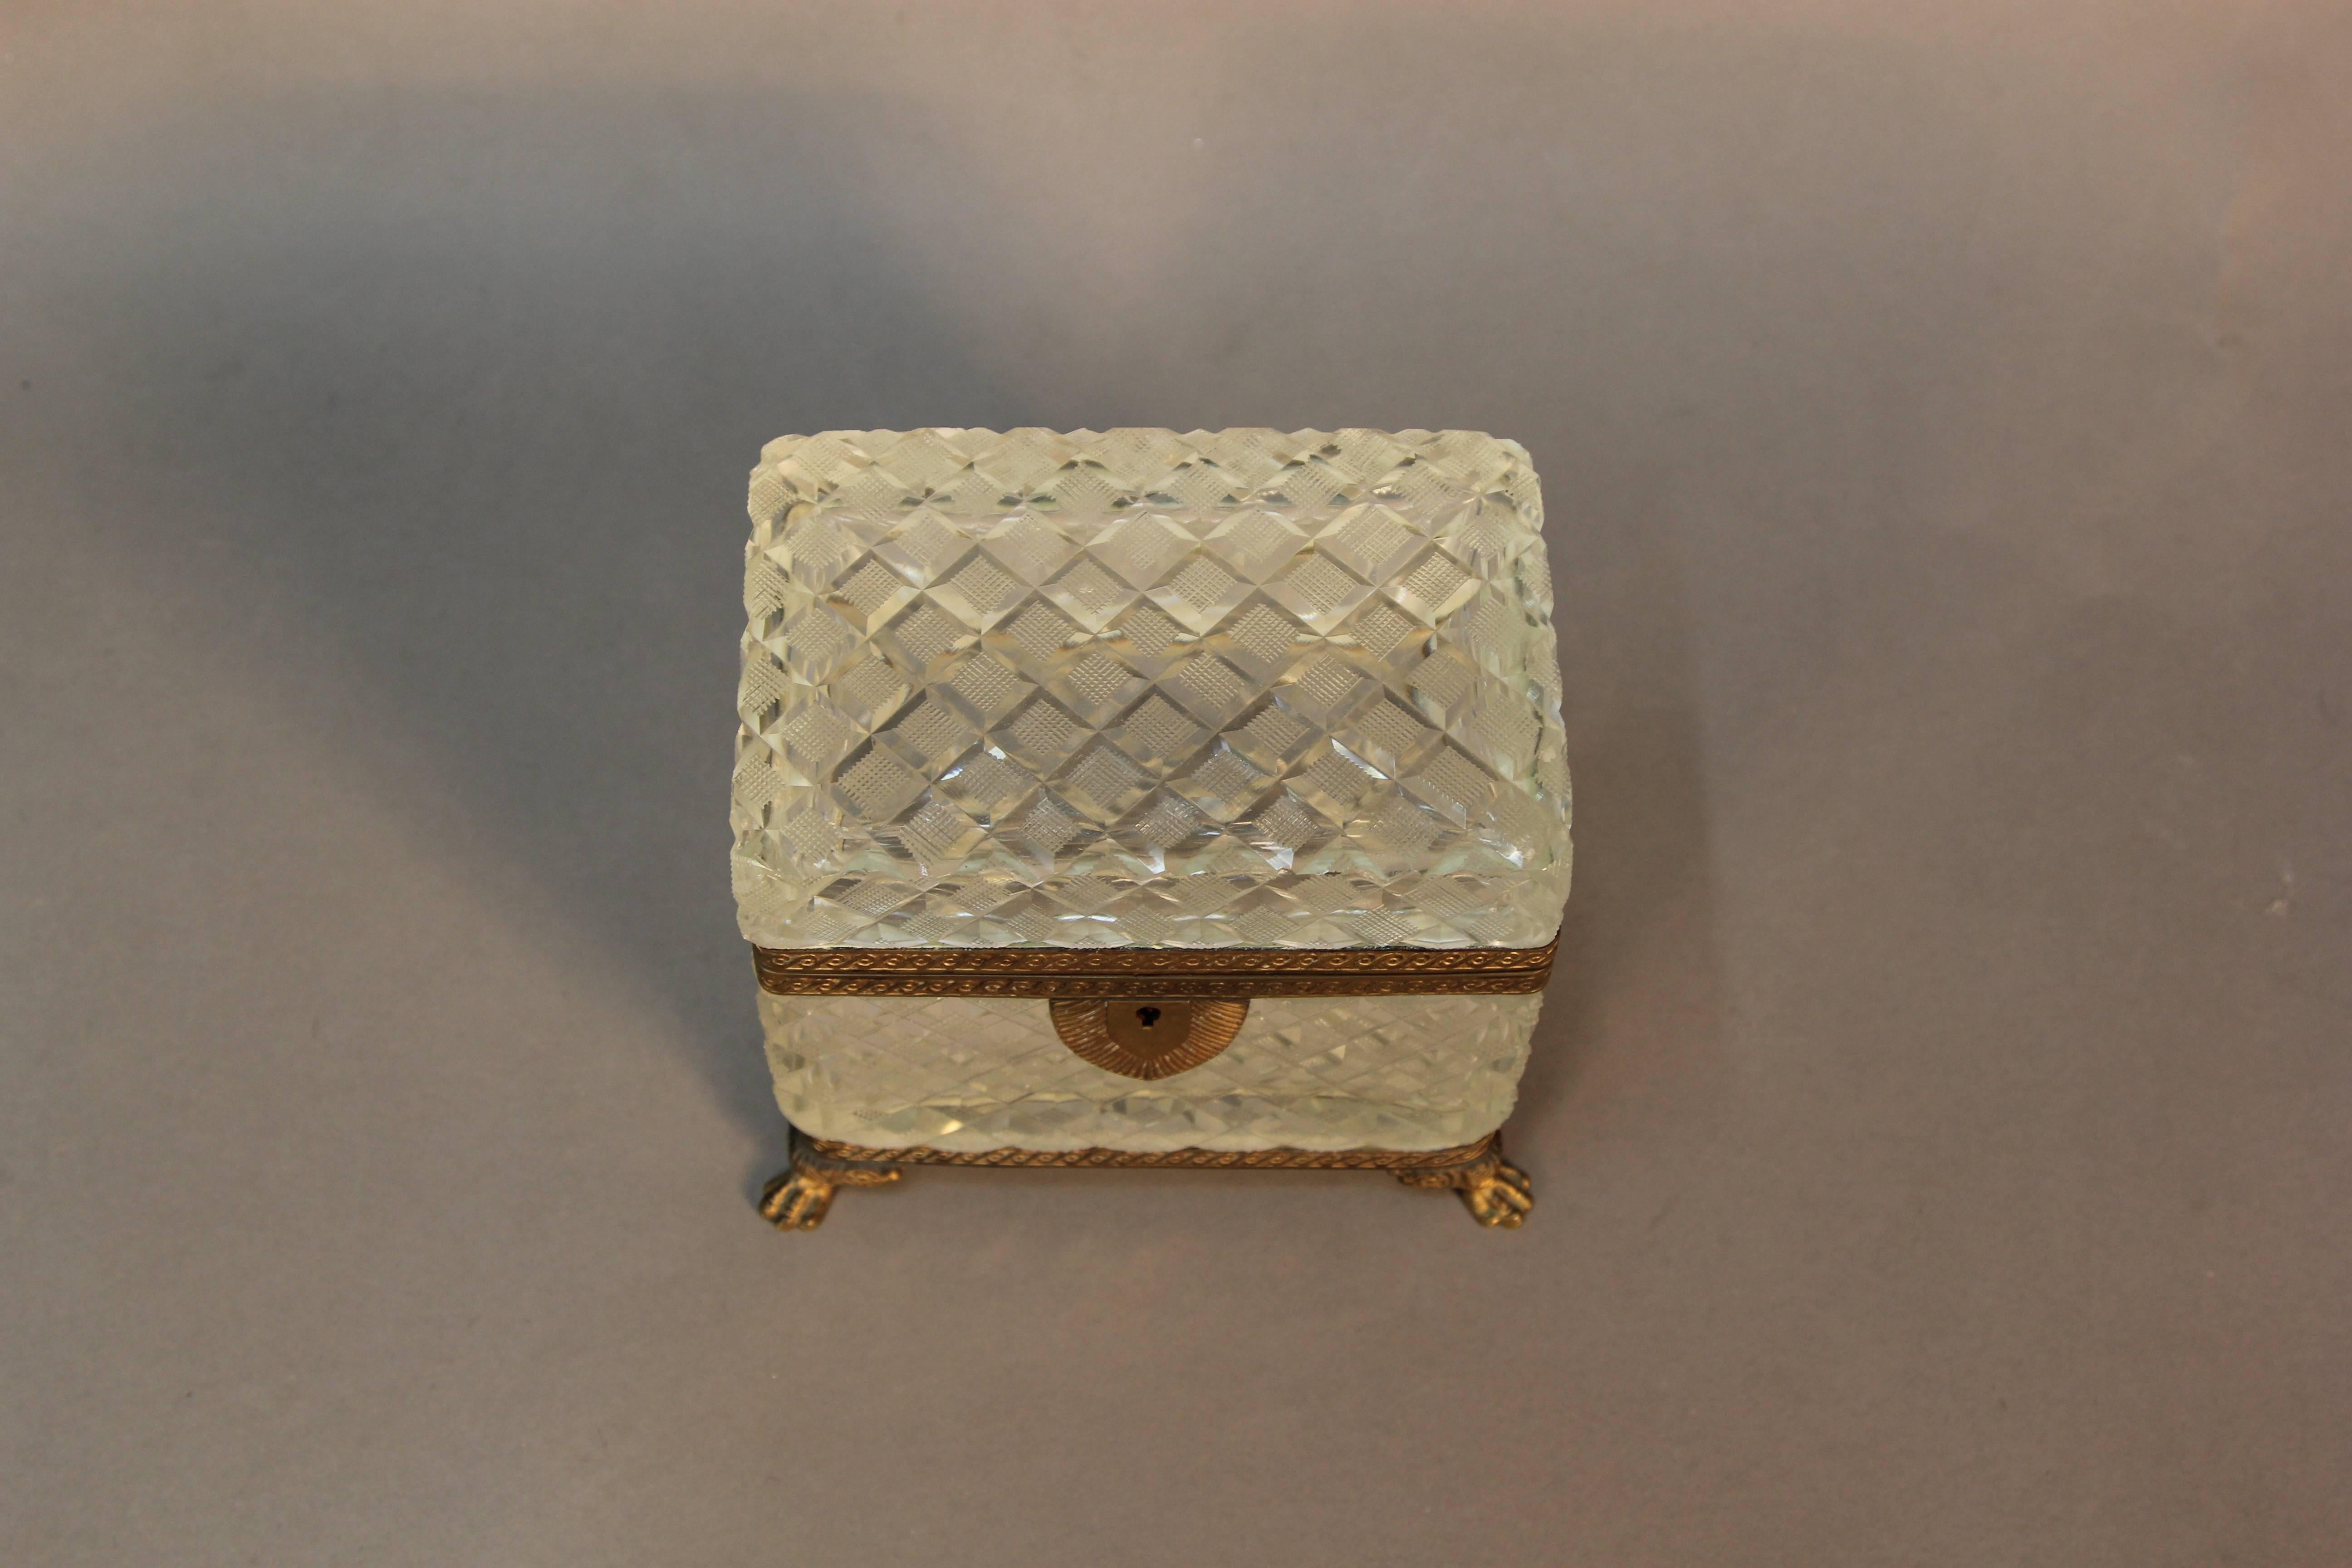 A rare antique cut diamond crystal and dore bronze jewel box/ casket. Gilt dore bronze mounts, nicely aged showing antique patina. With animal paw feet.